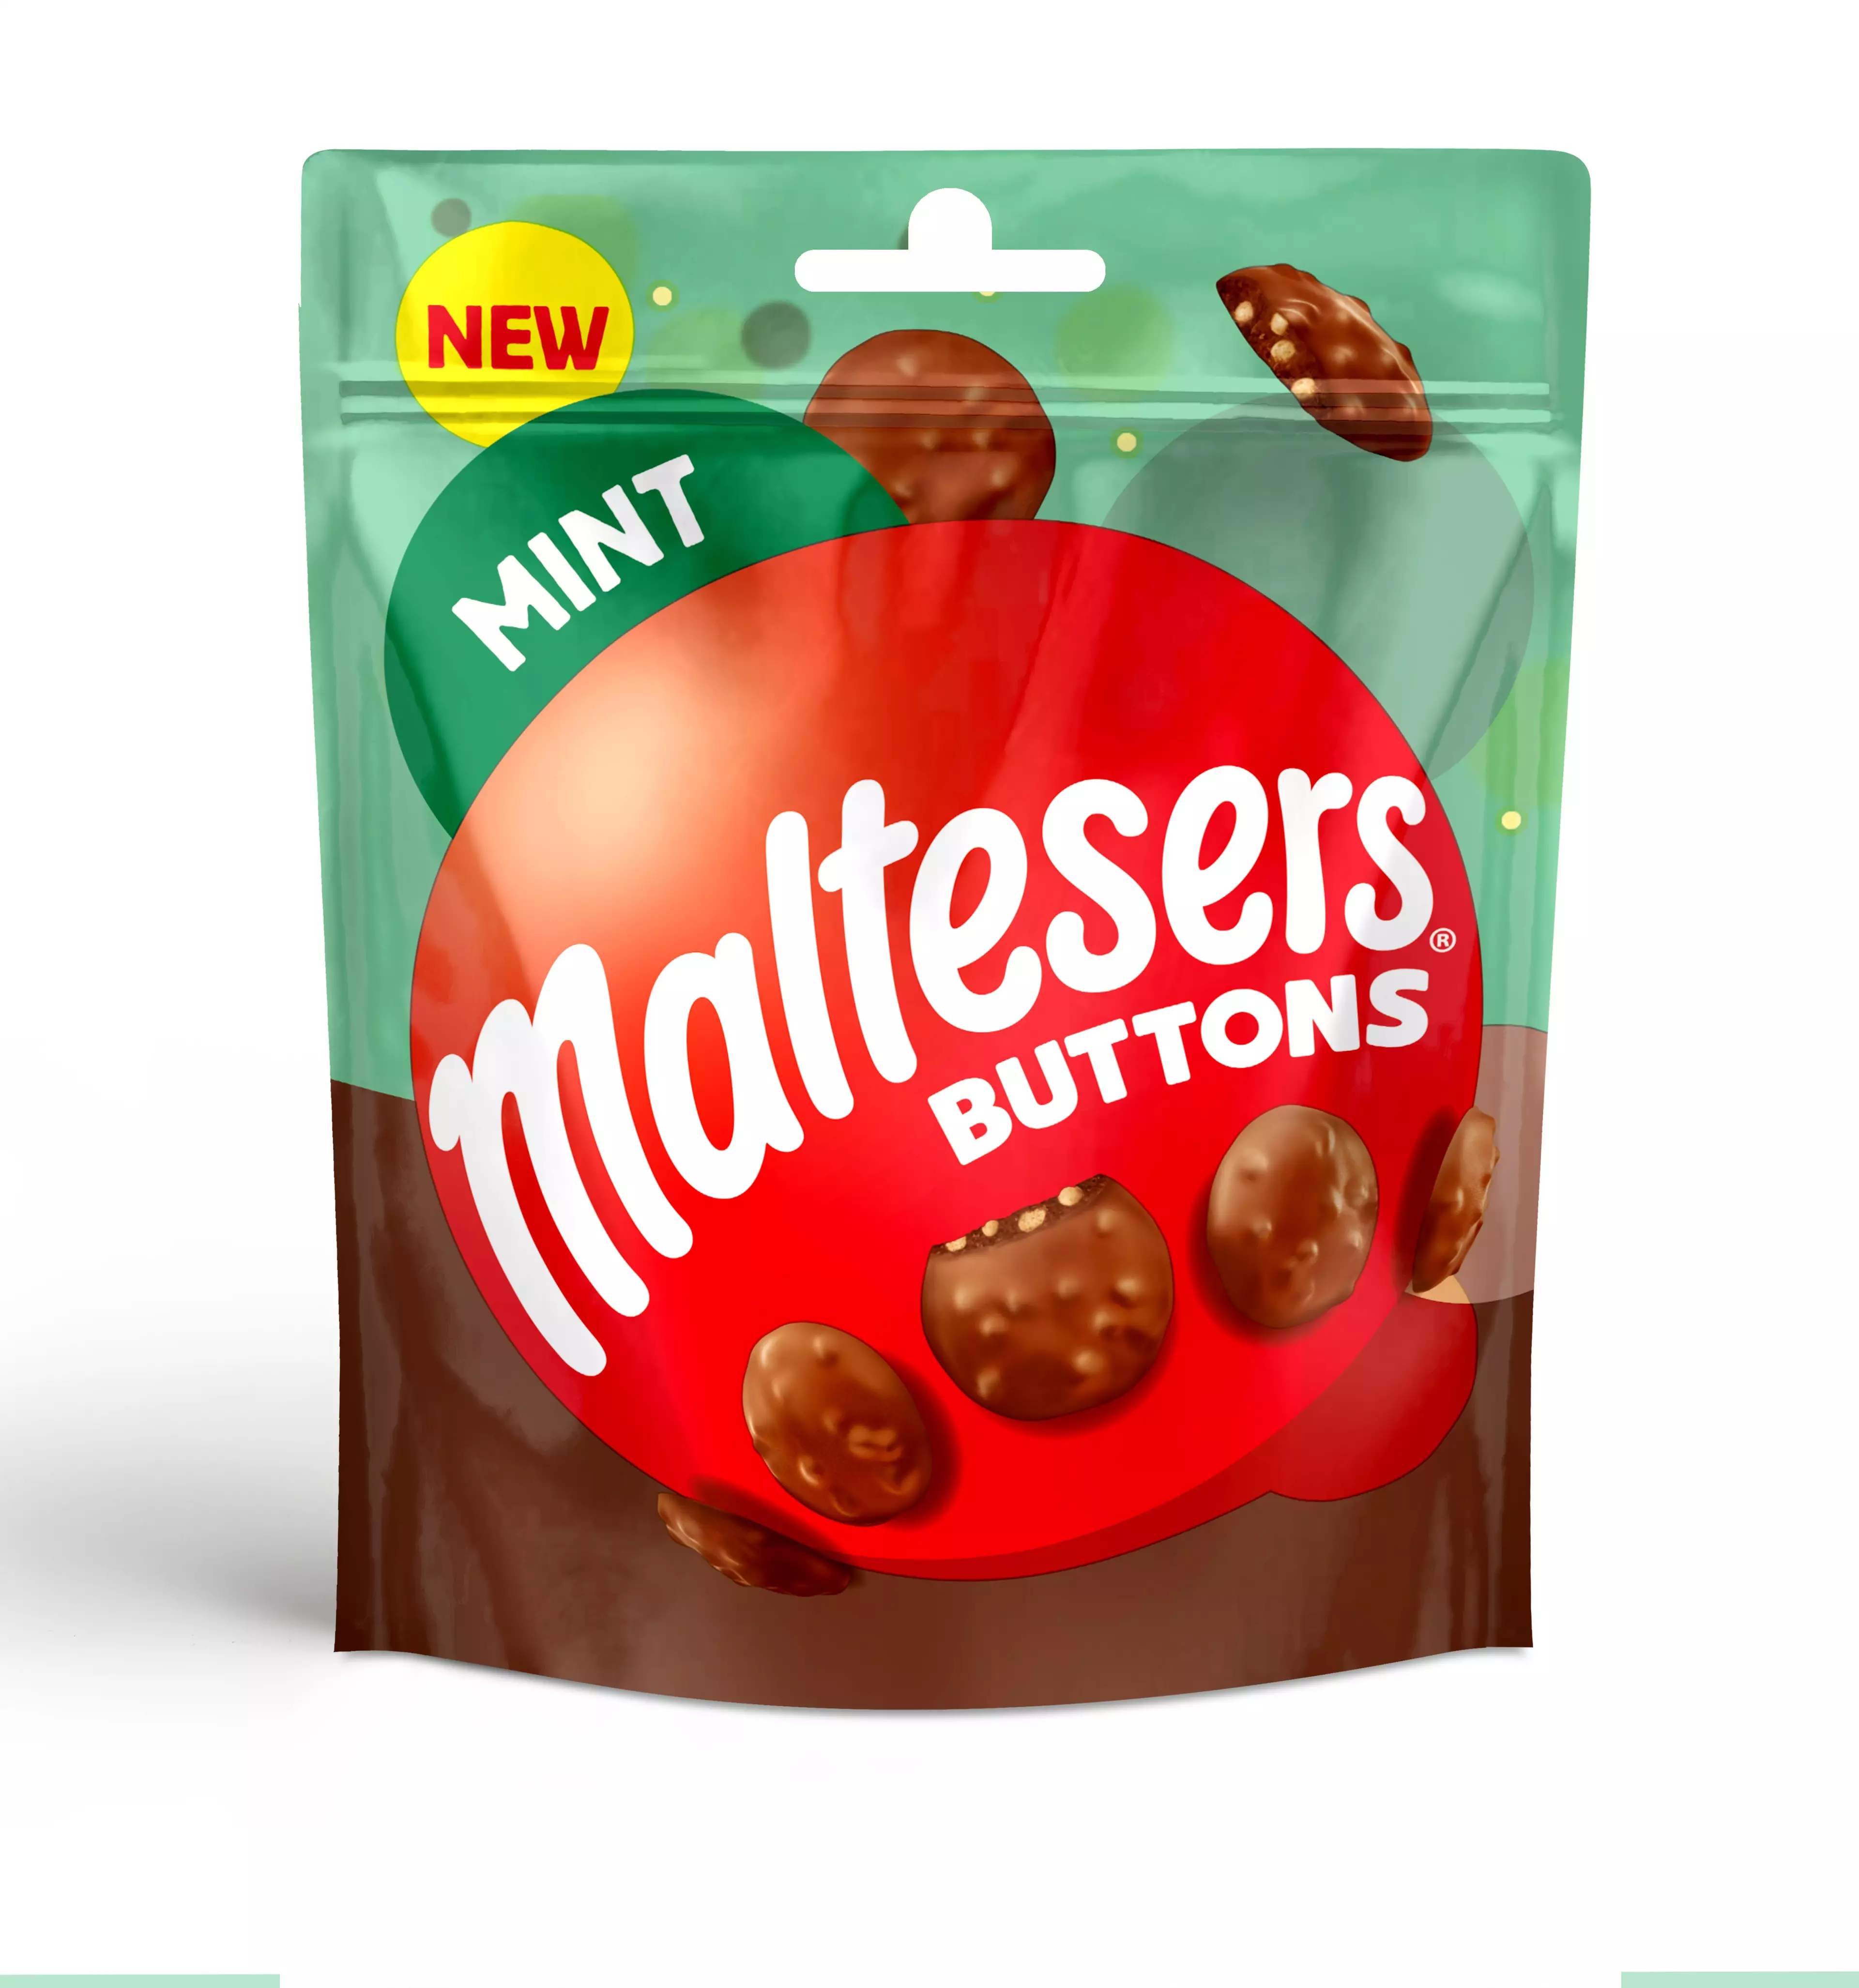 The Mint Malteser Buttons come in small and sharer packs (